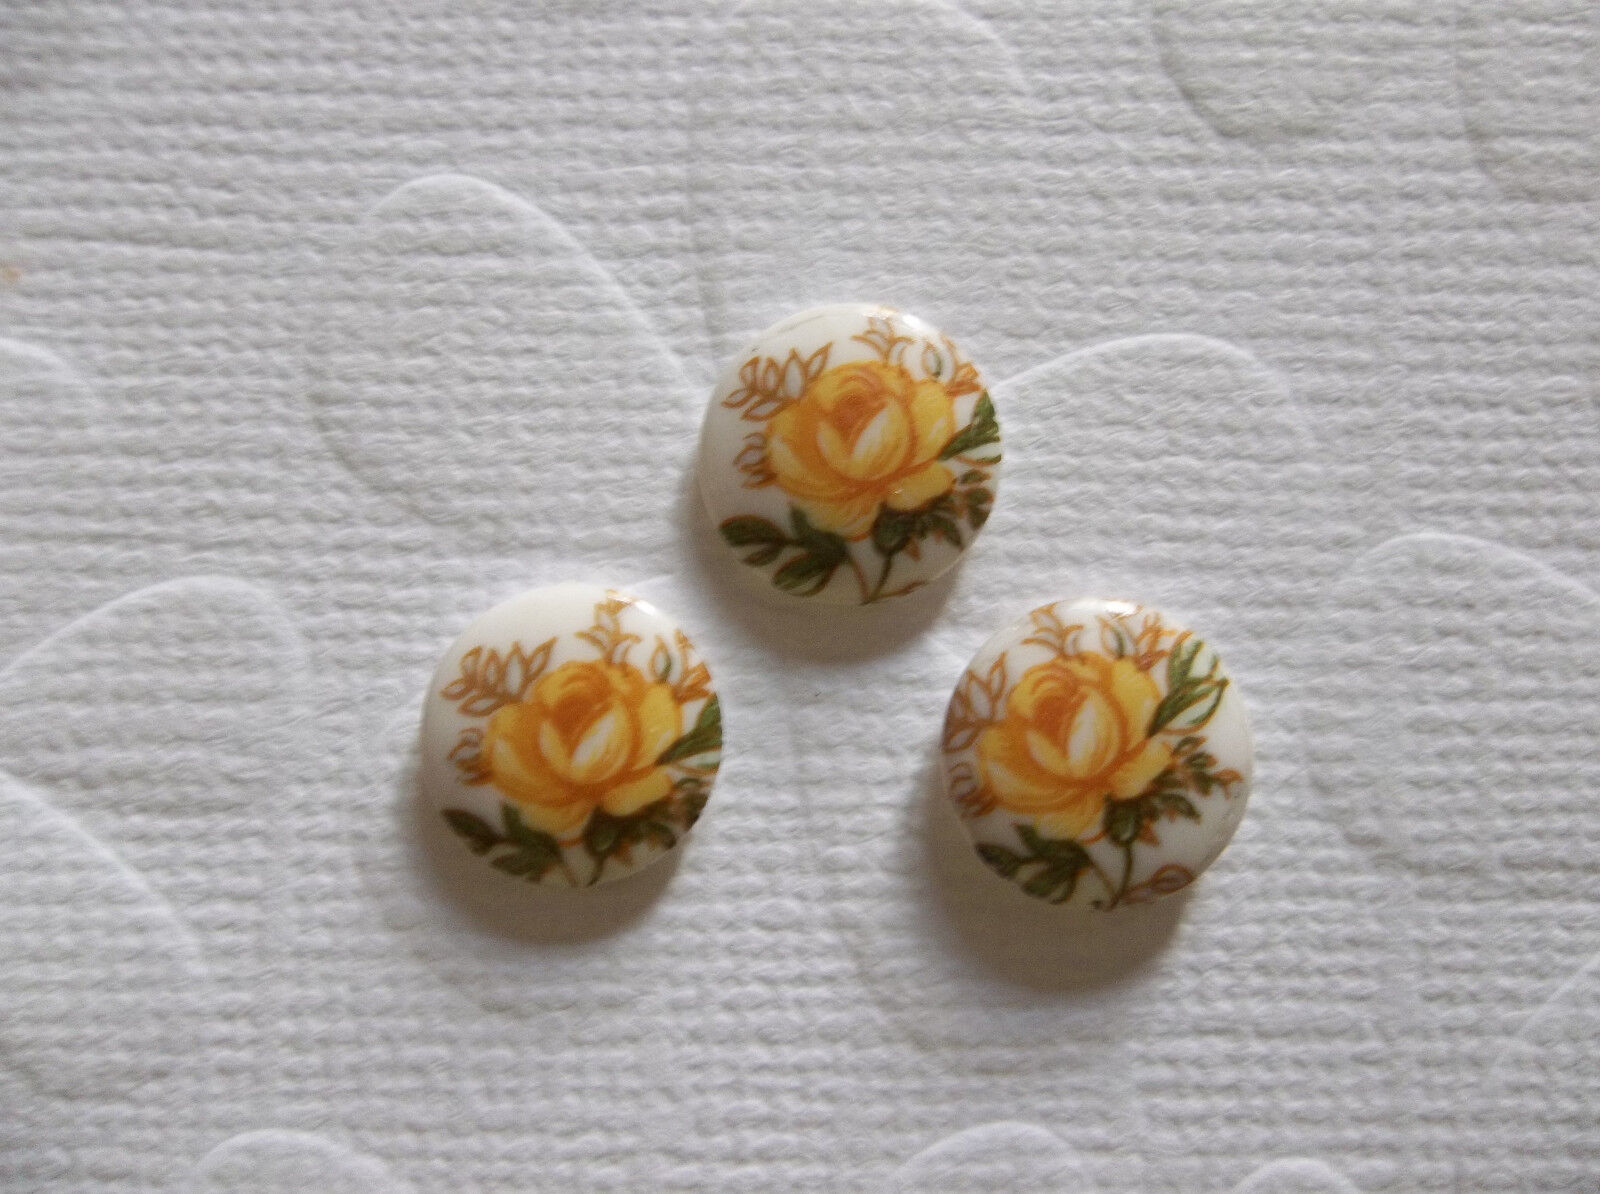 Vintage Cameos - 10mm Yellow Rose - White Glass Cabochons - 6 pcs